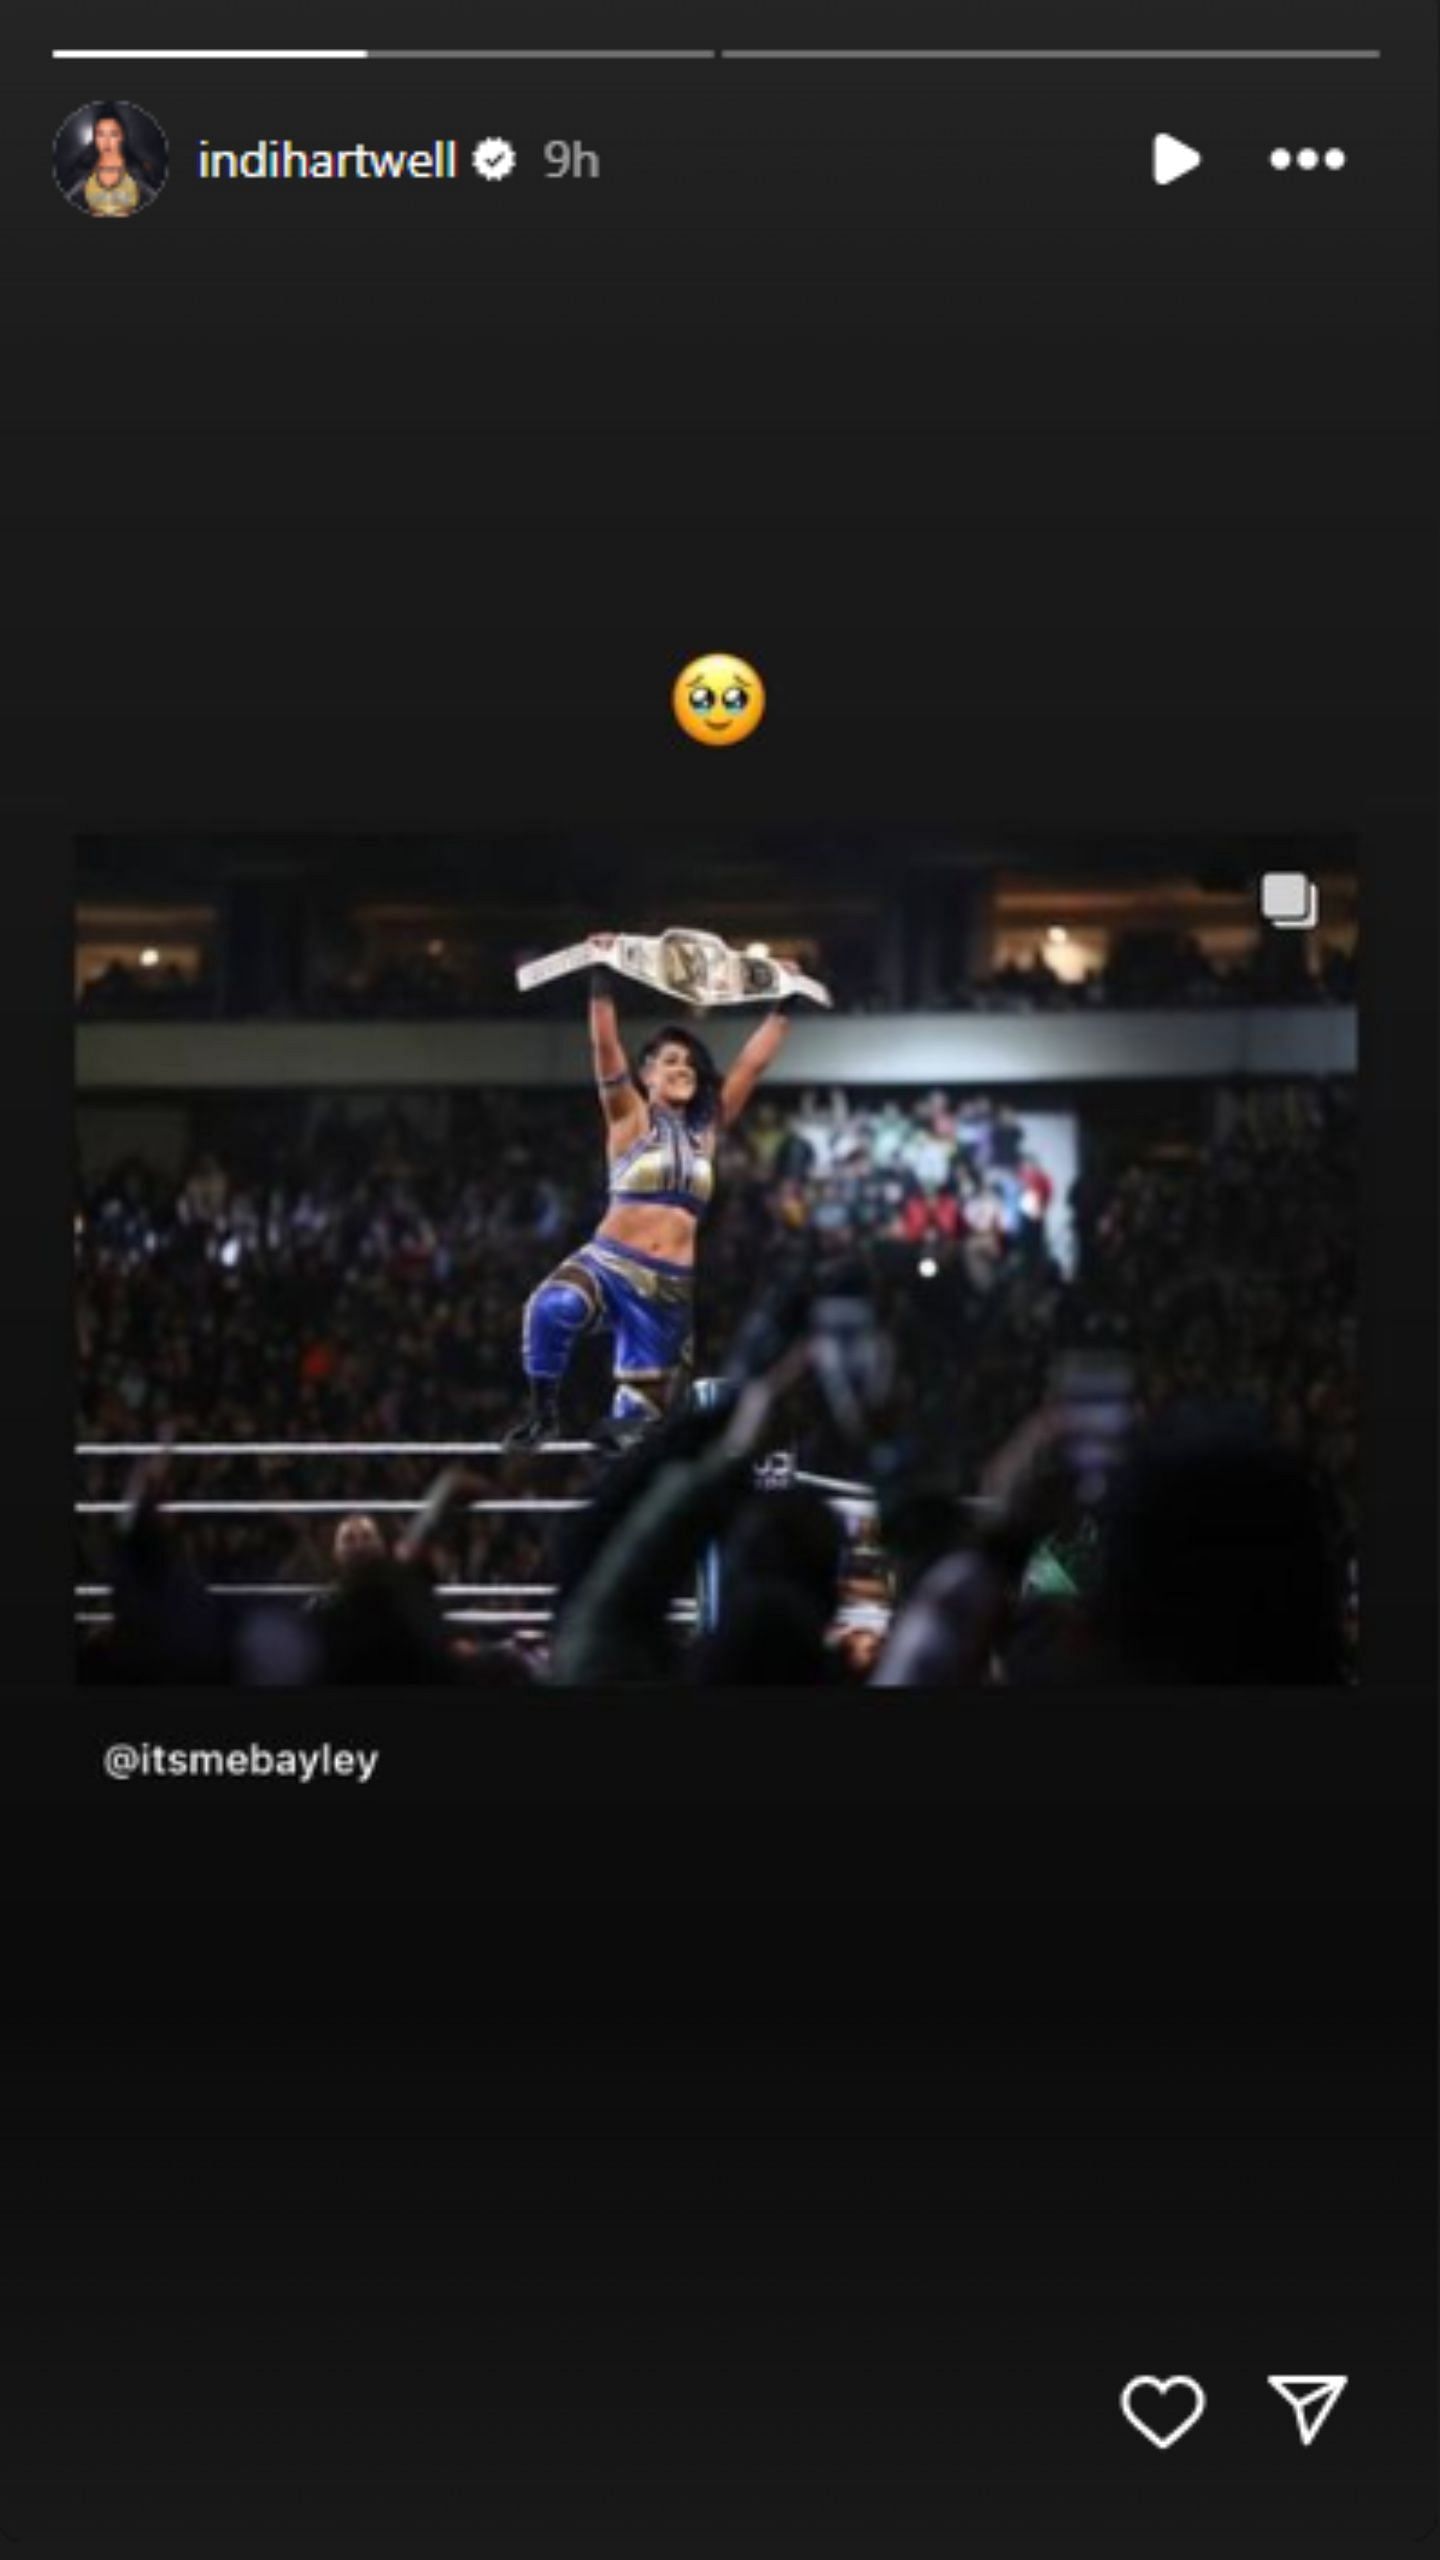 Indi Hartwell shared this on her Instagram stories.